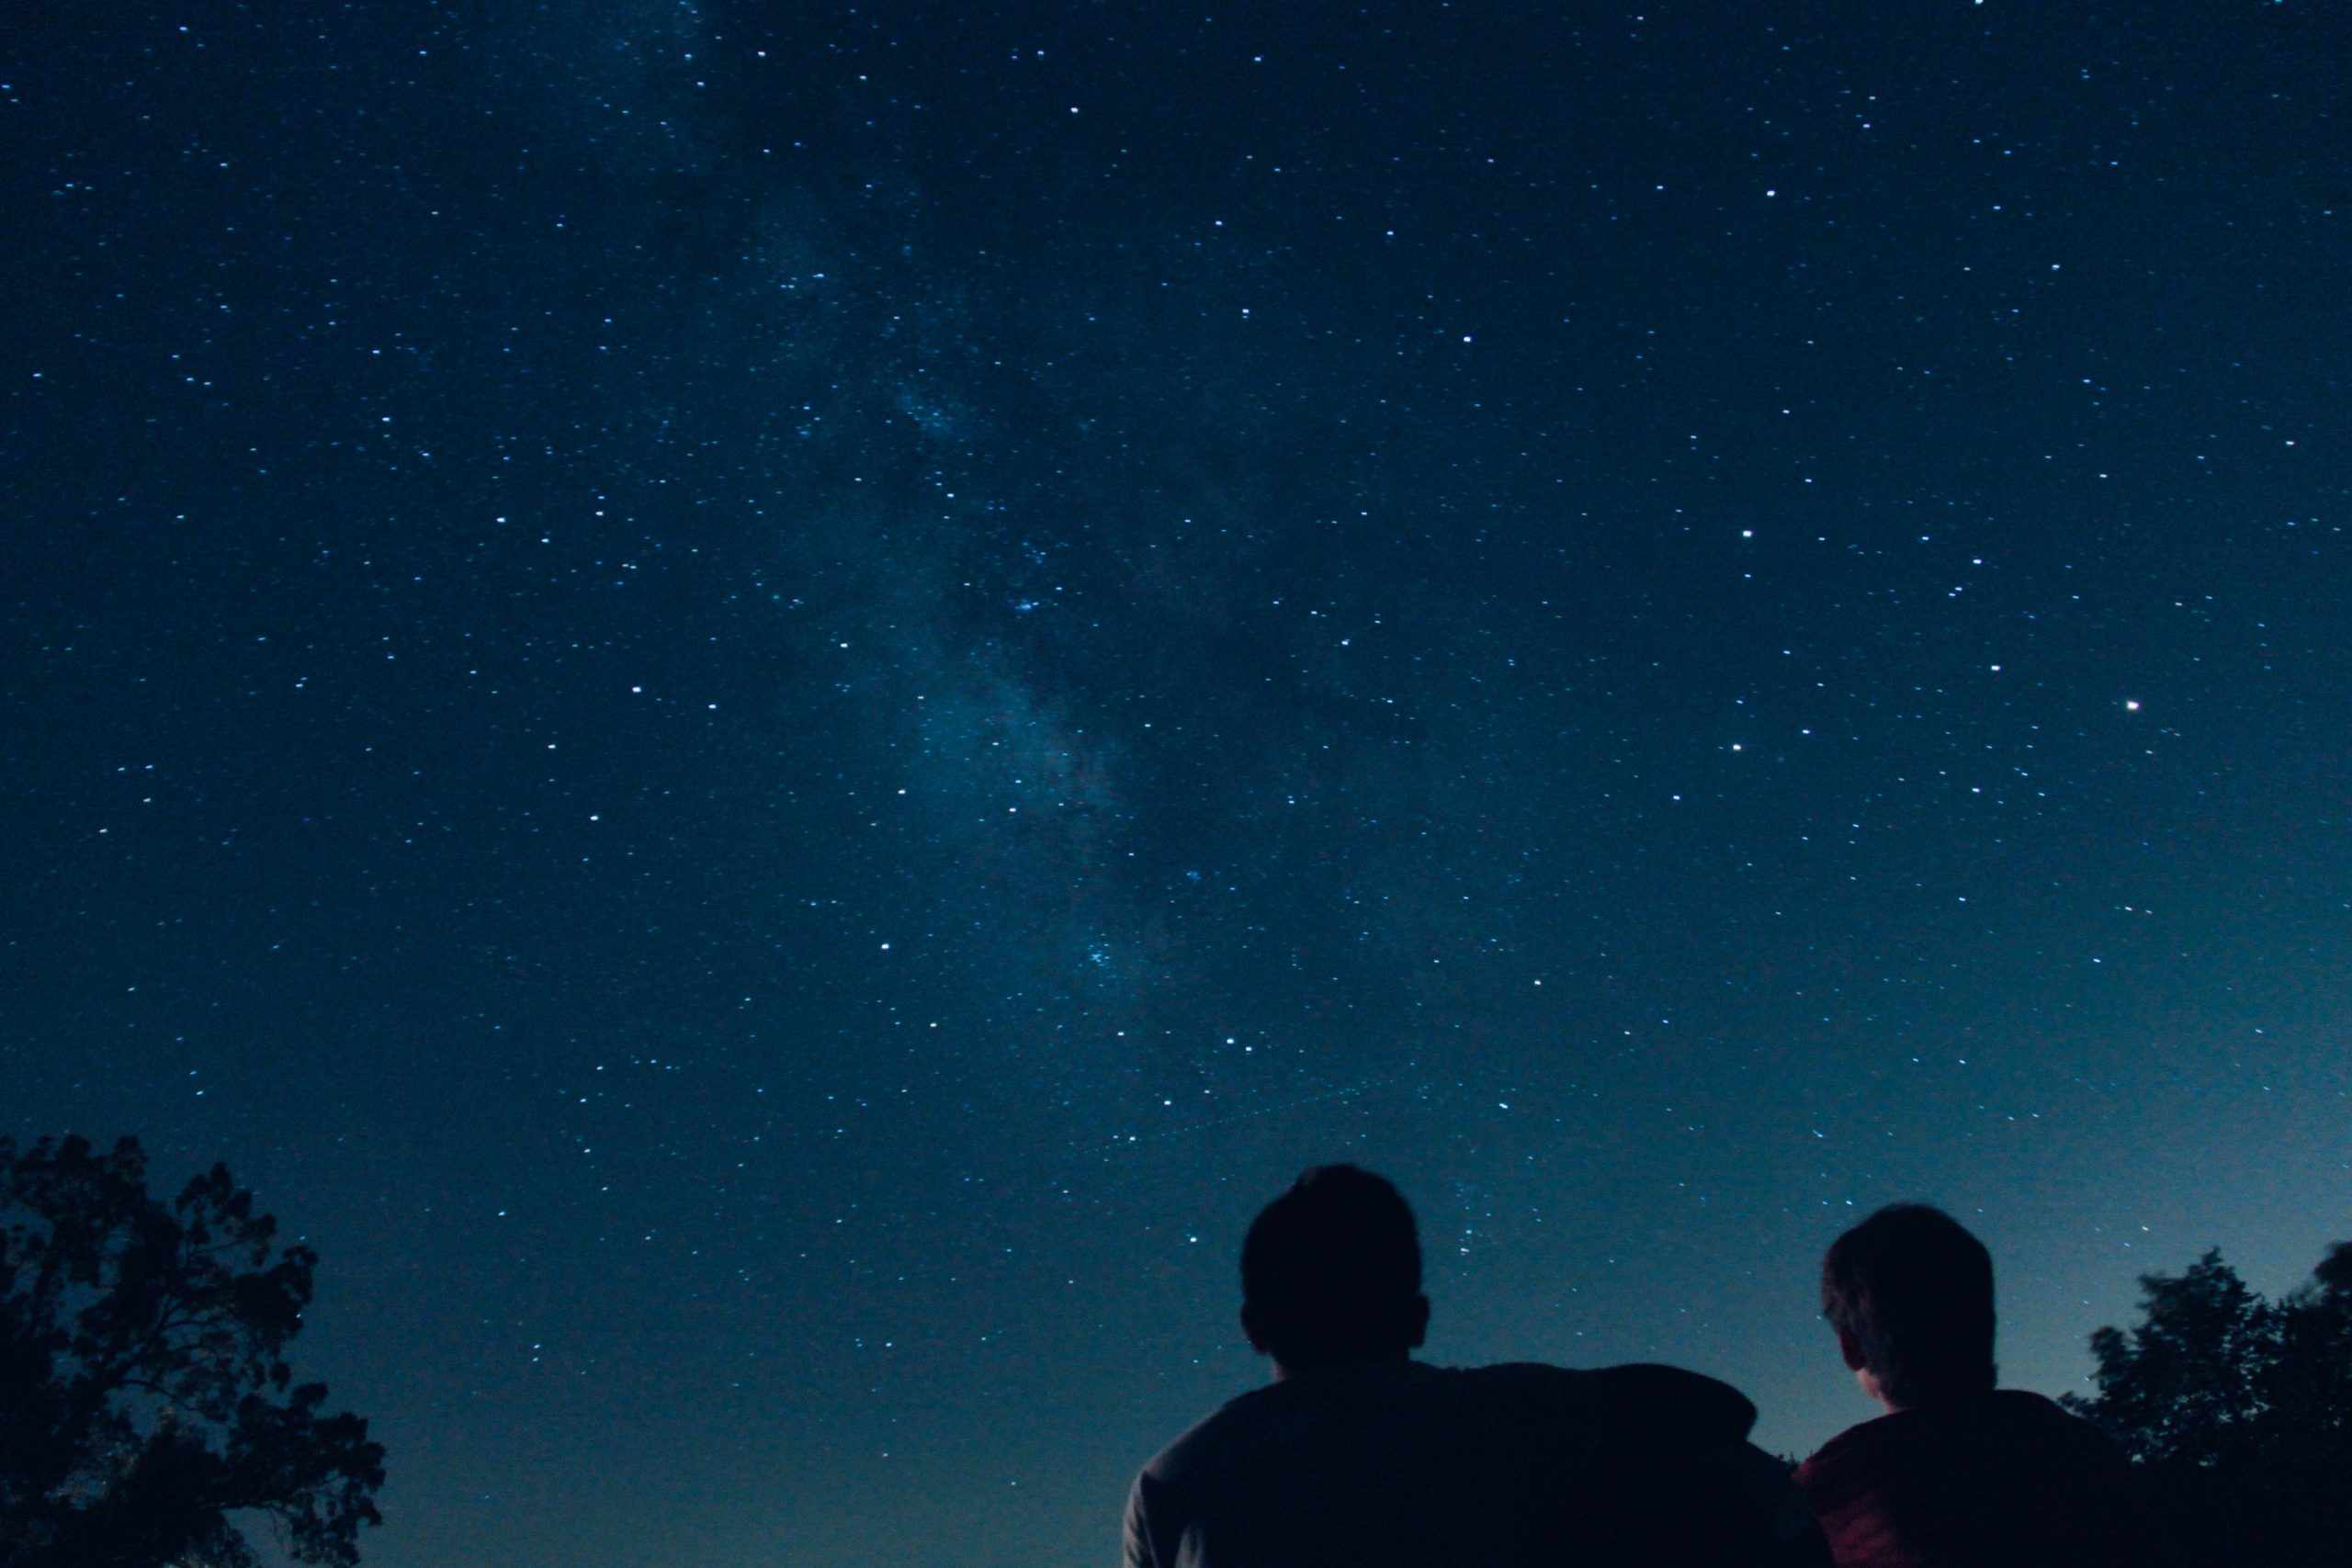 Outdoorsy’s Guide To Stargazing This Fall